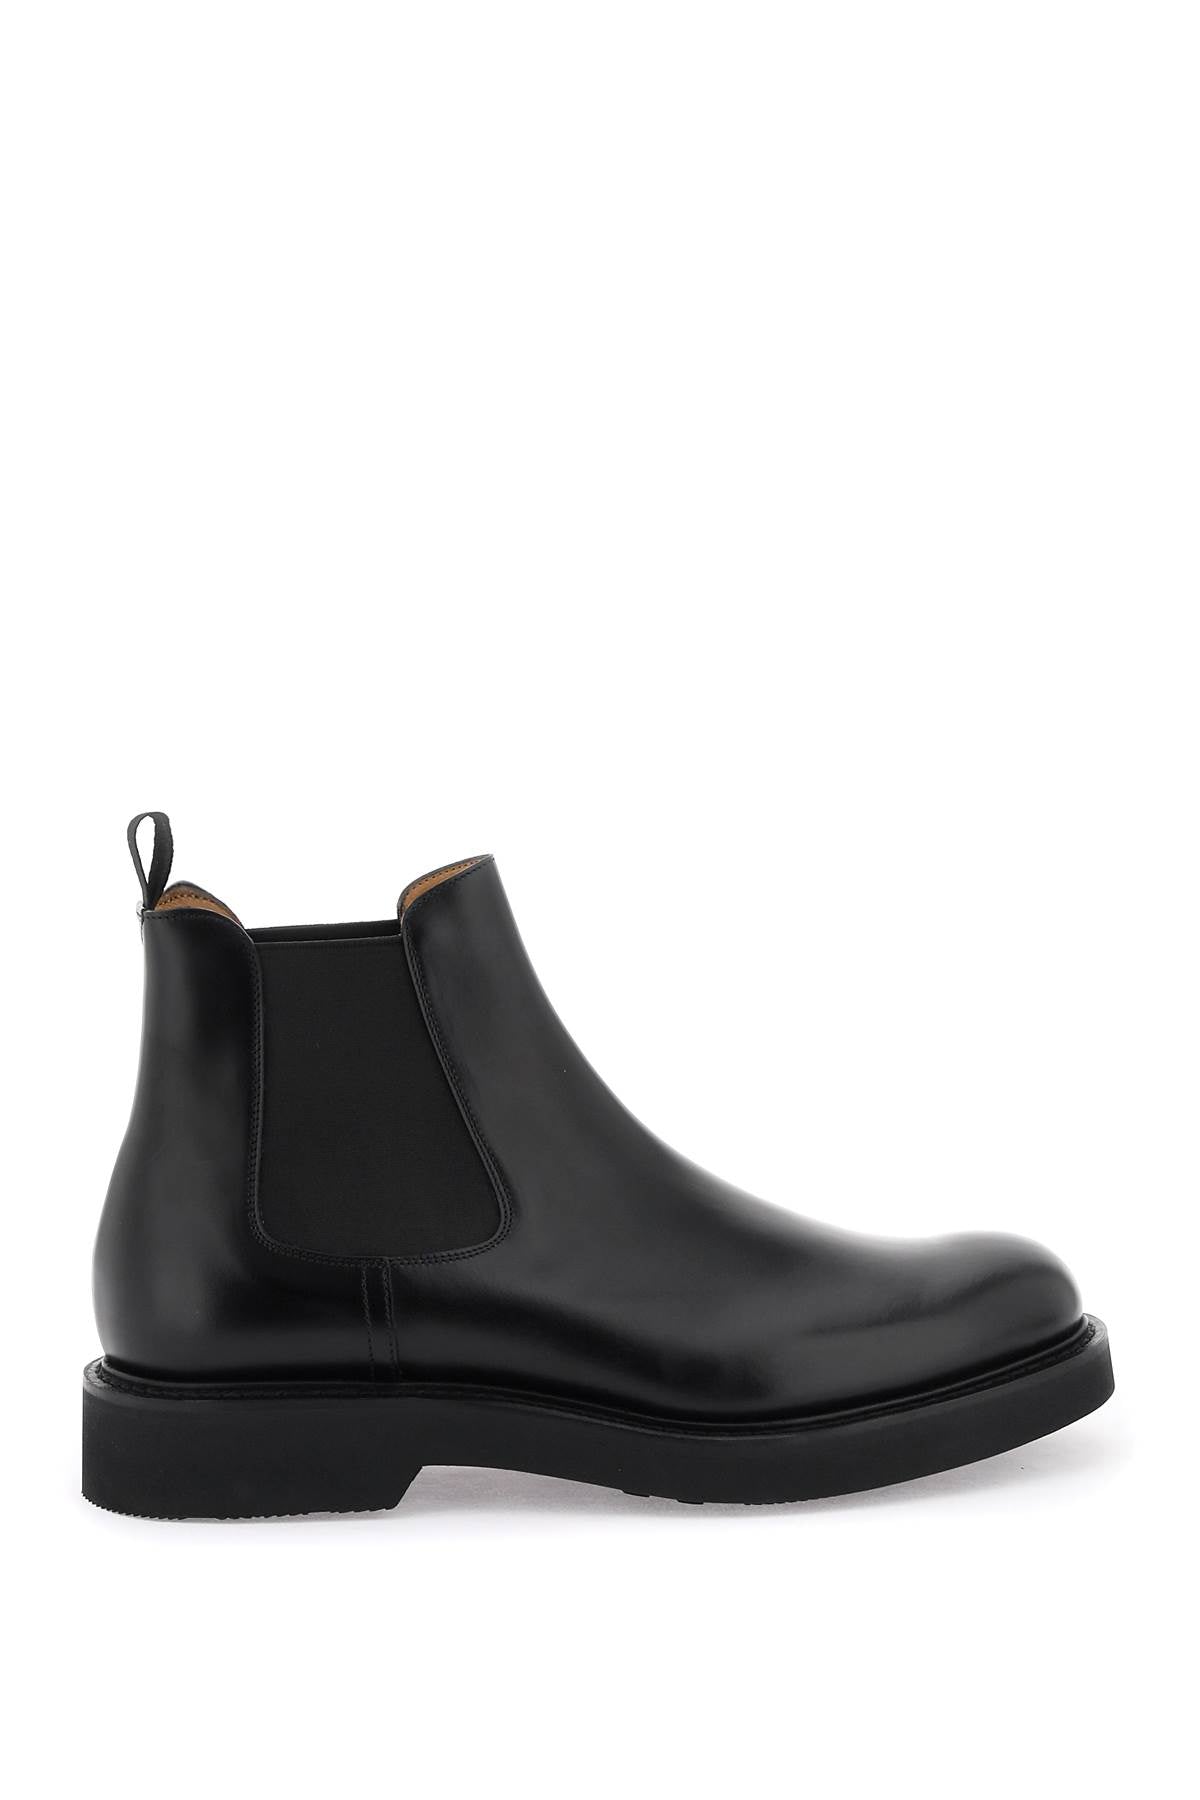 Shop Church's Semi-gloss Leather Chelsea Boots For Men In Classic Black